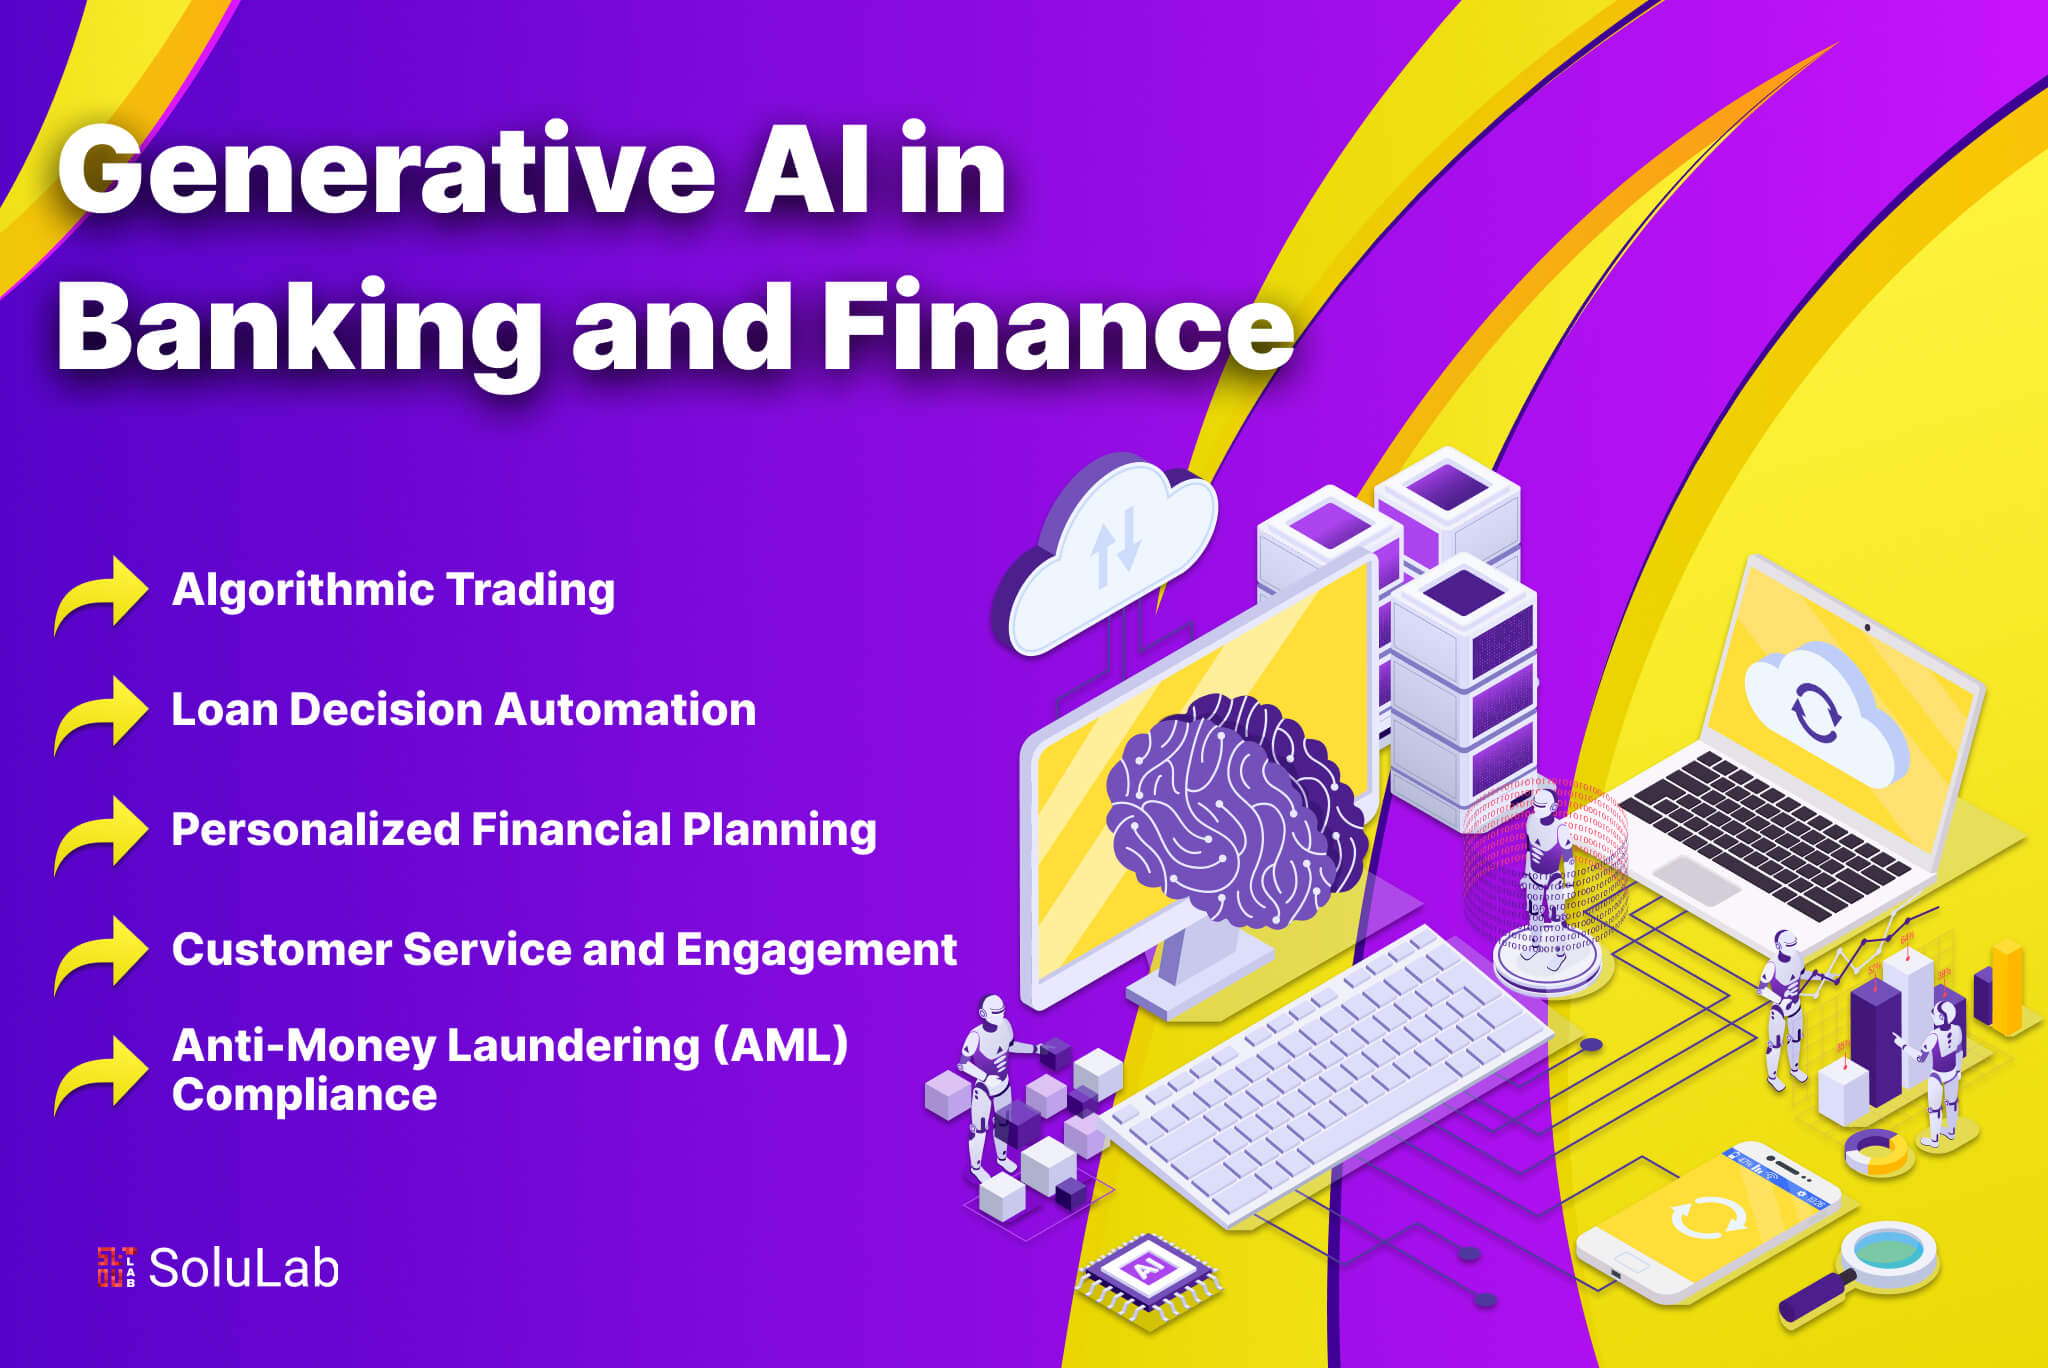 Generative AI in Banking and Finance